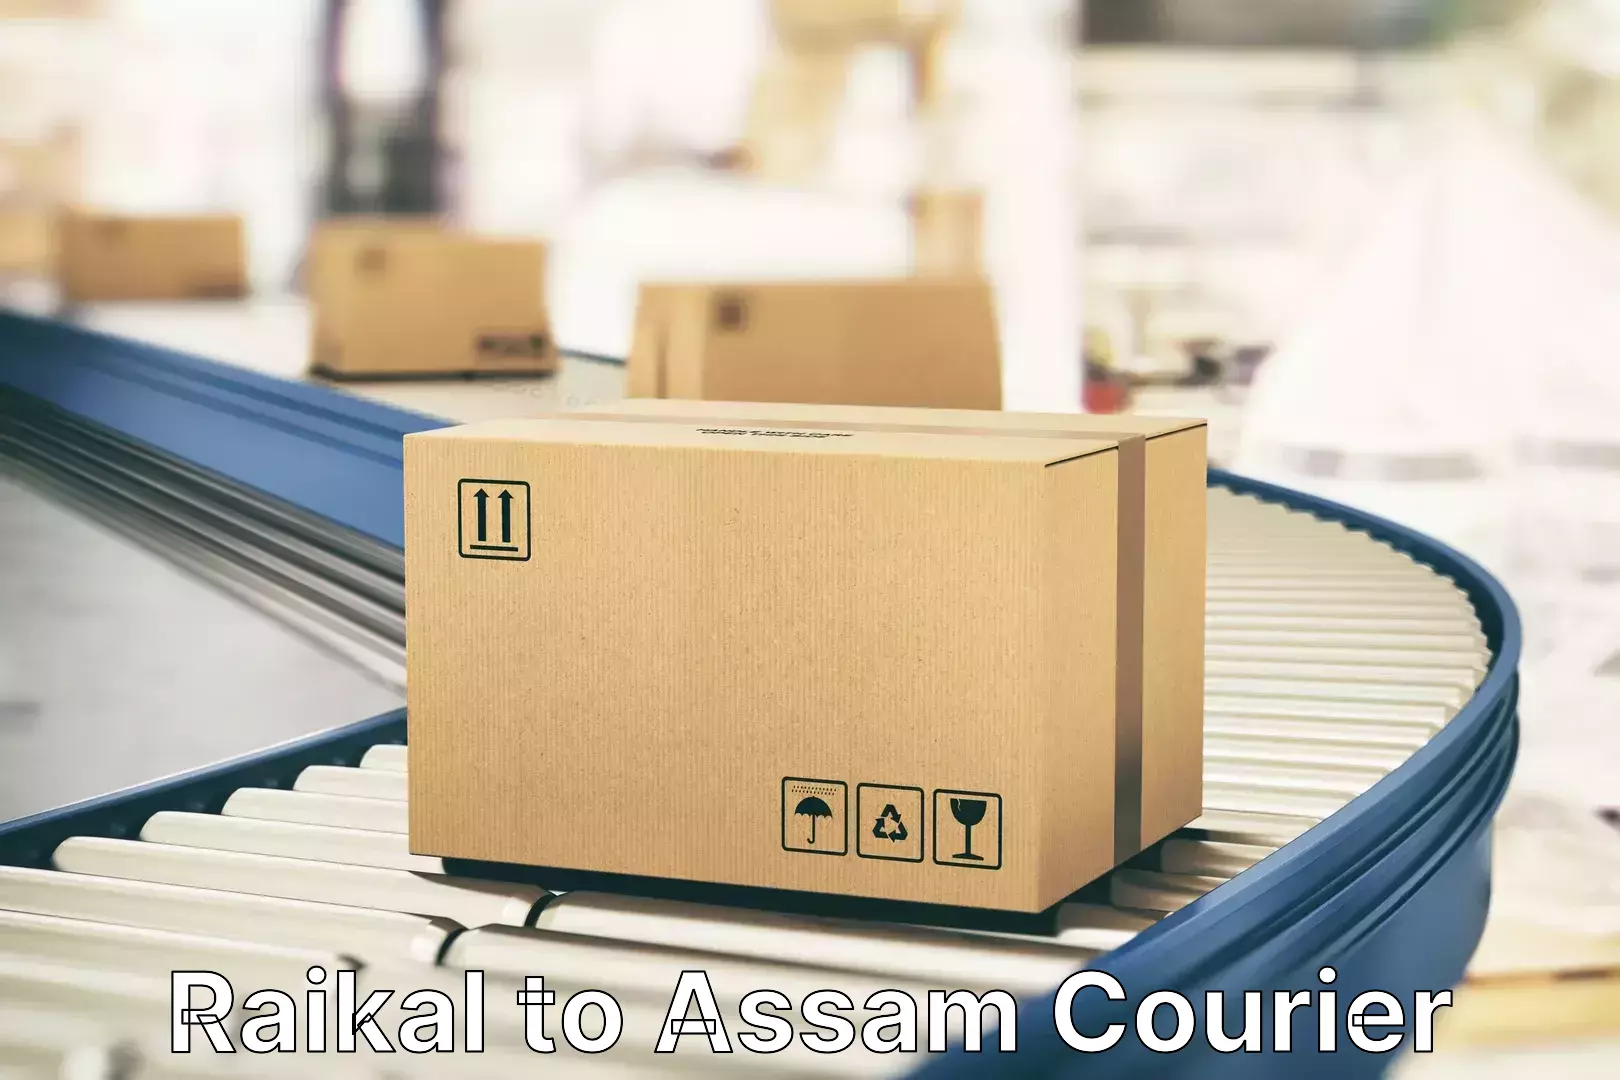 Fast track baggage delivery Raikal to Kamrup